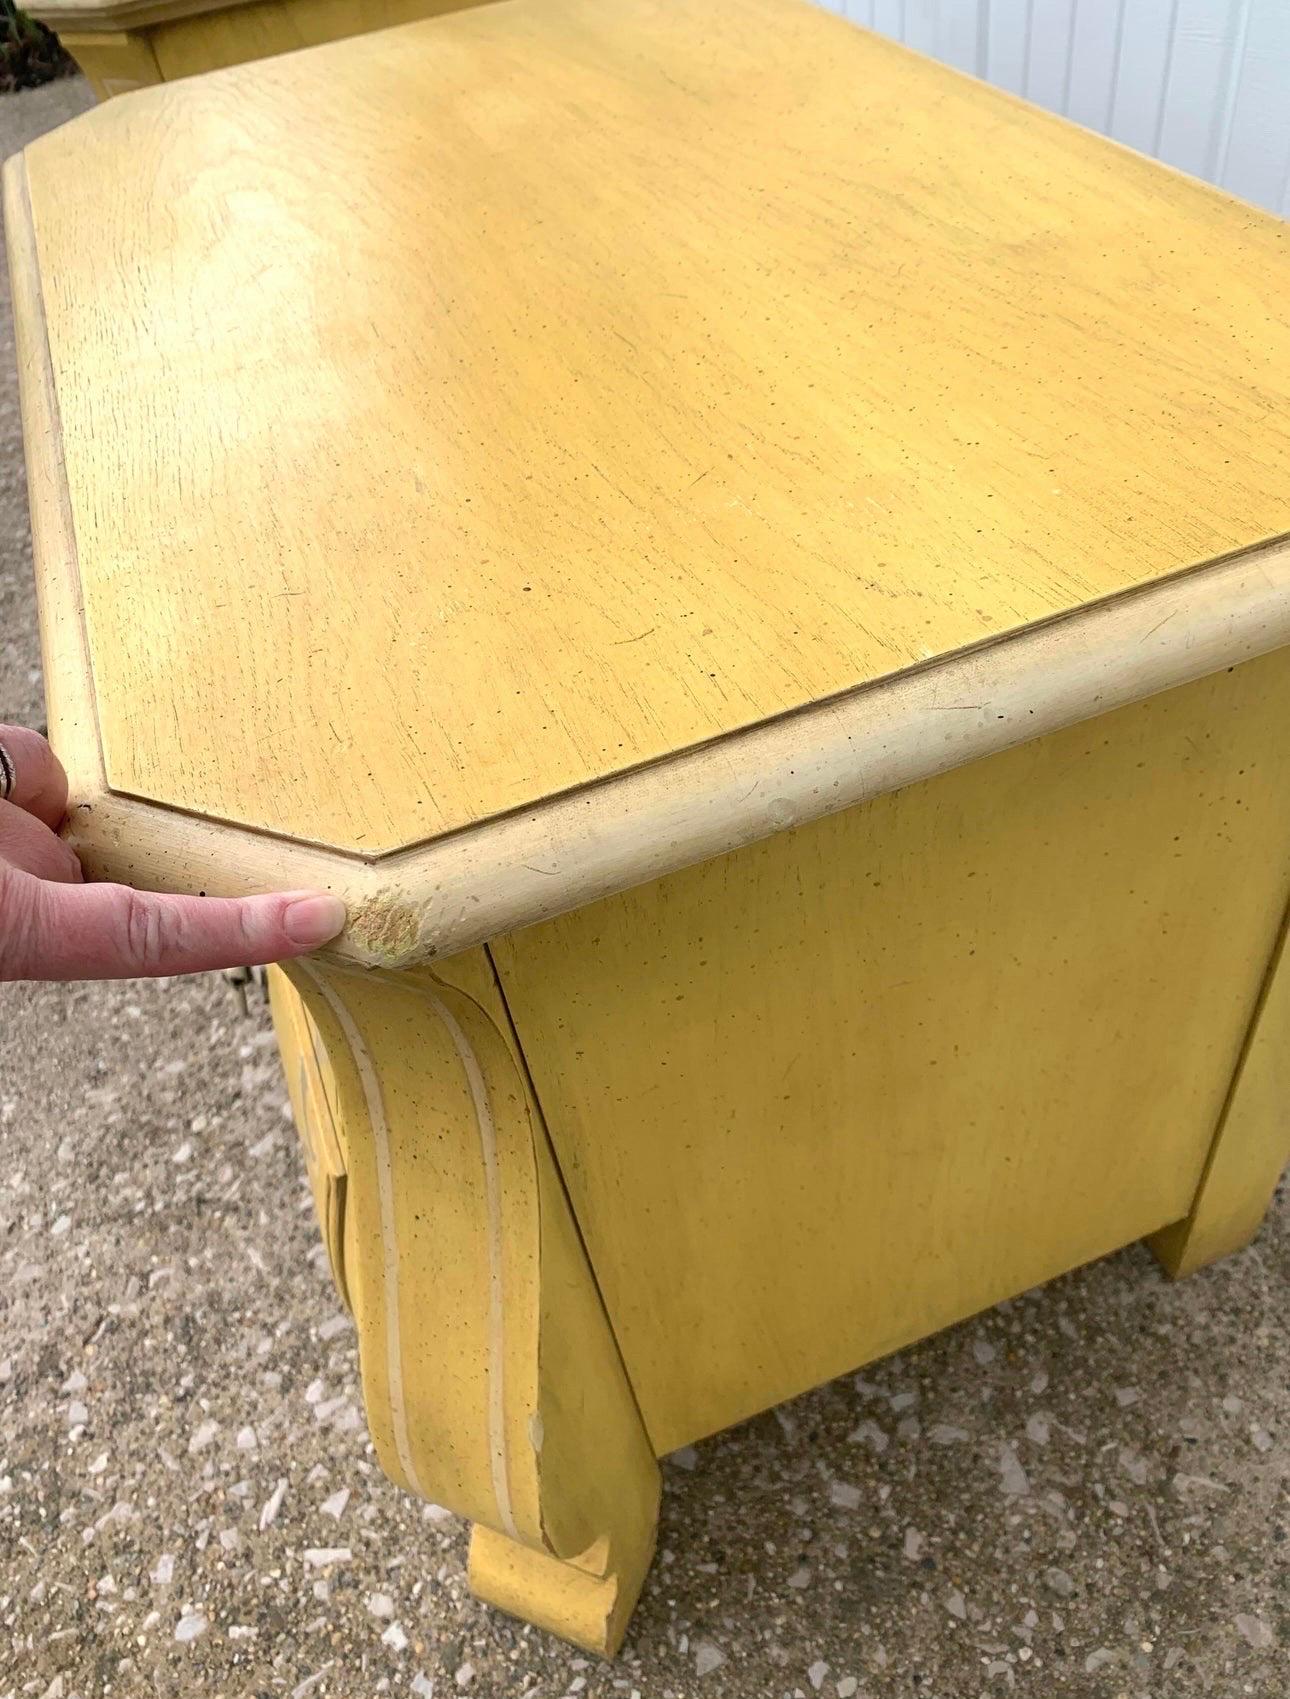 Vintage 1960’s Drexel French Bombay chest nightstands a pair. In good vintage condition. In original mustard yellow faux bois rococo paint. Does need some restoration. A bleach spot on the top of one and some chips here and there you can see in the